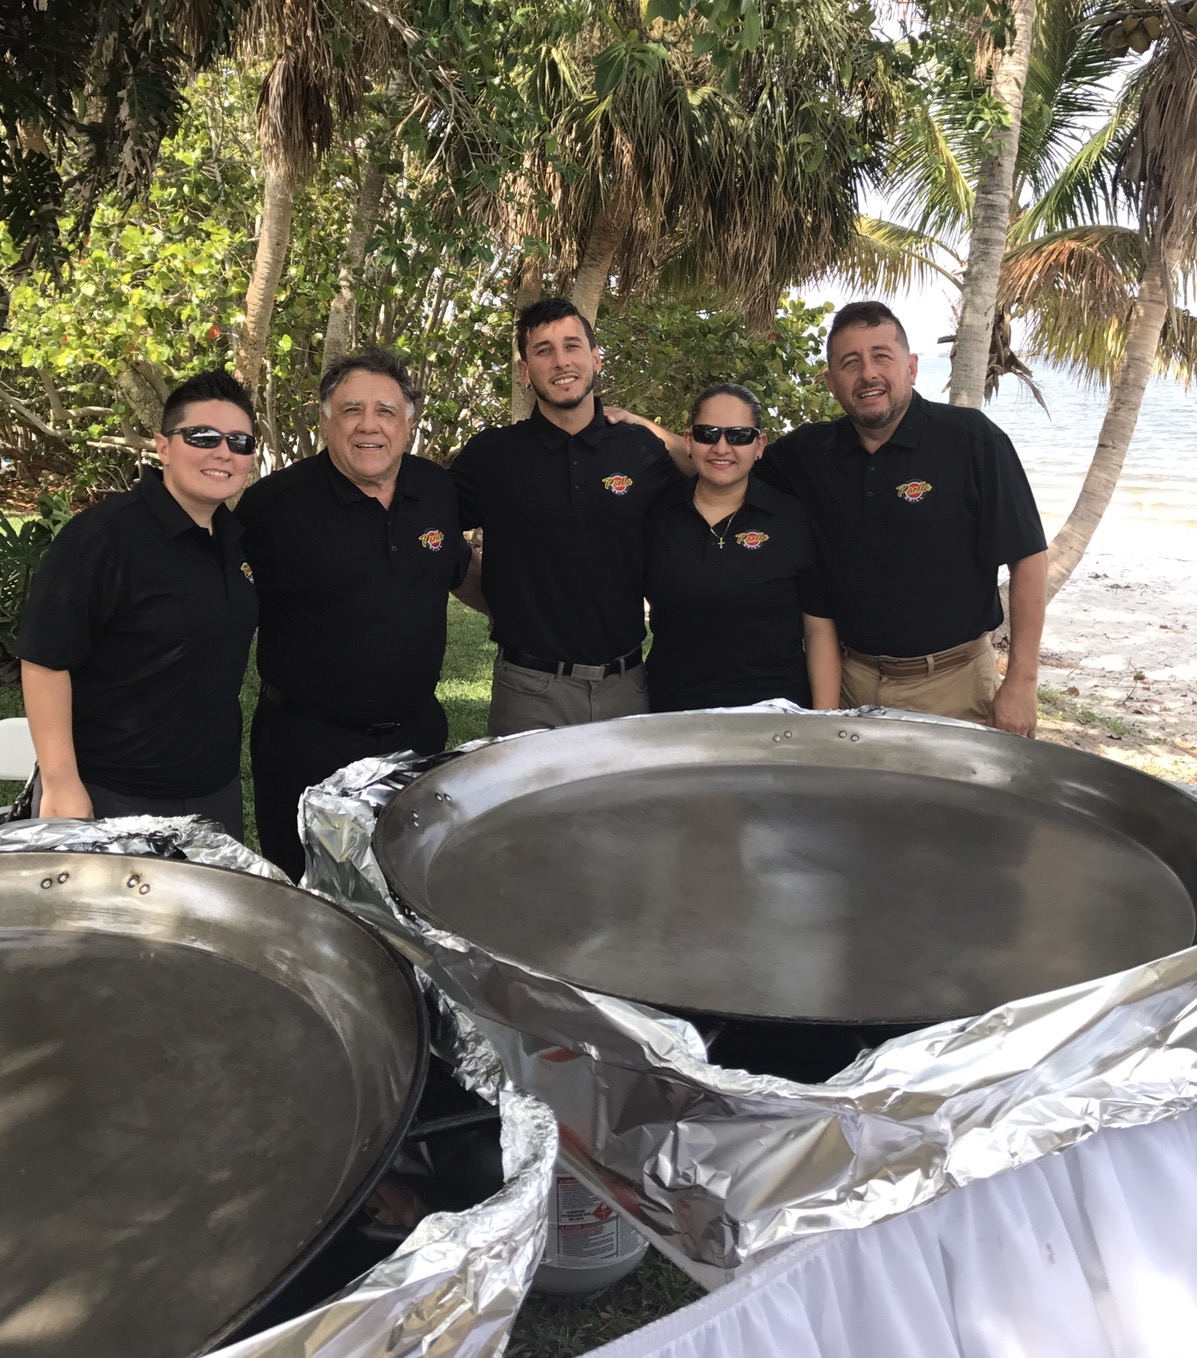 Owner and Chef Luis Elu and staff onsite at Paella Grill Catering Event